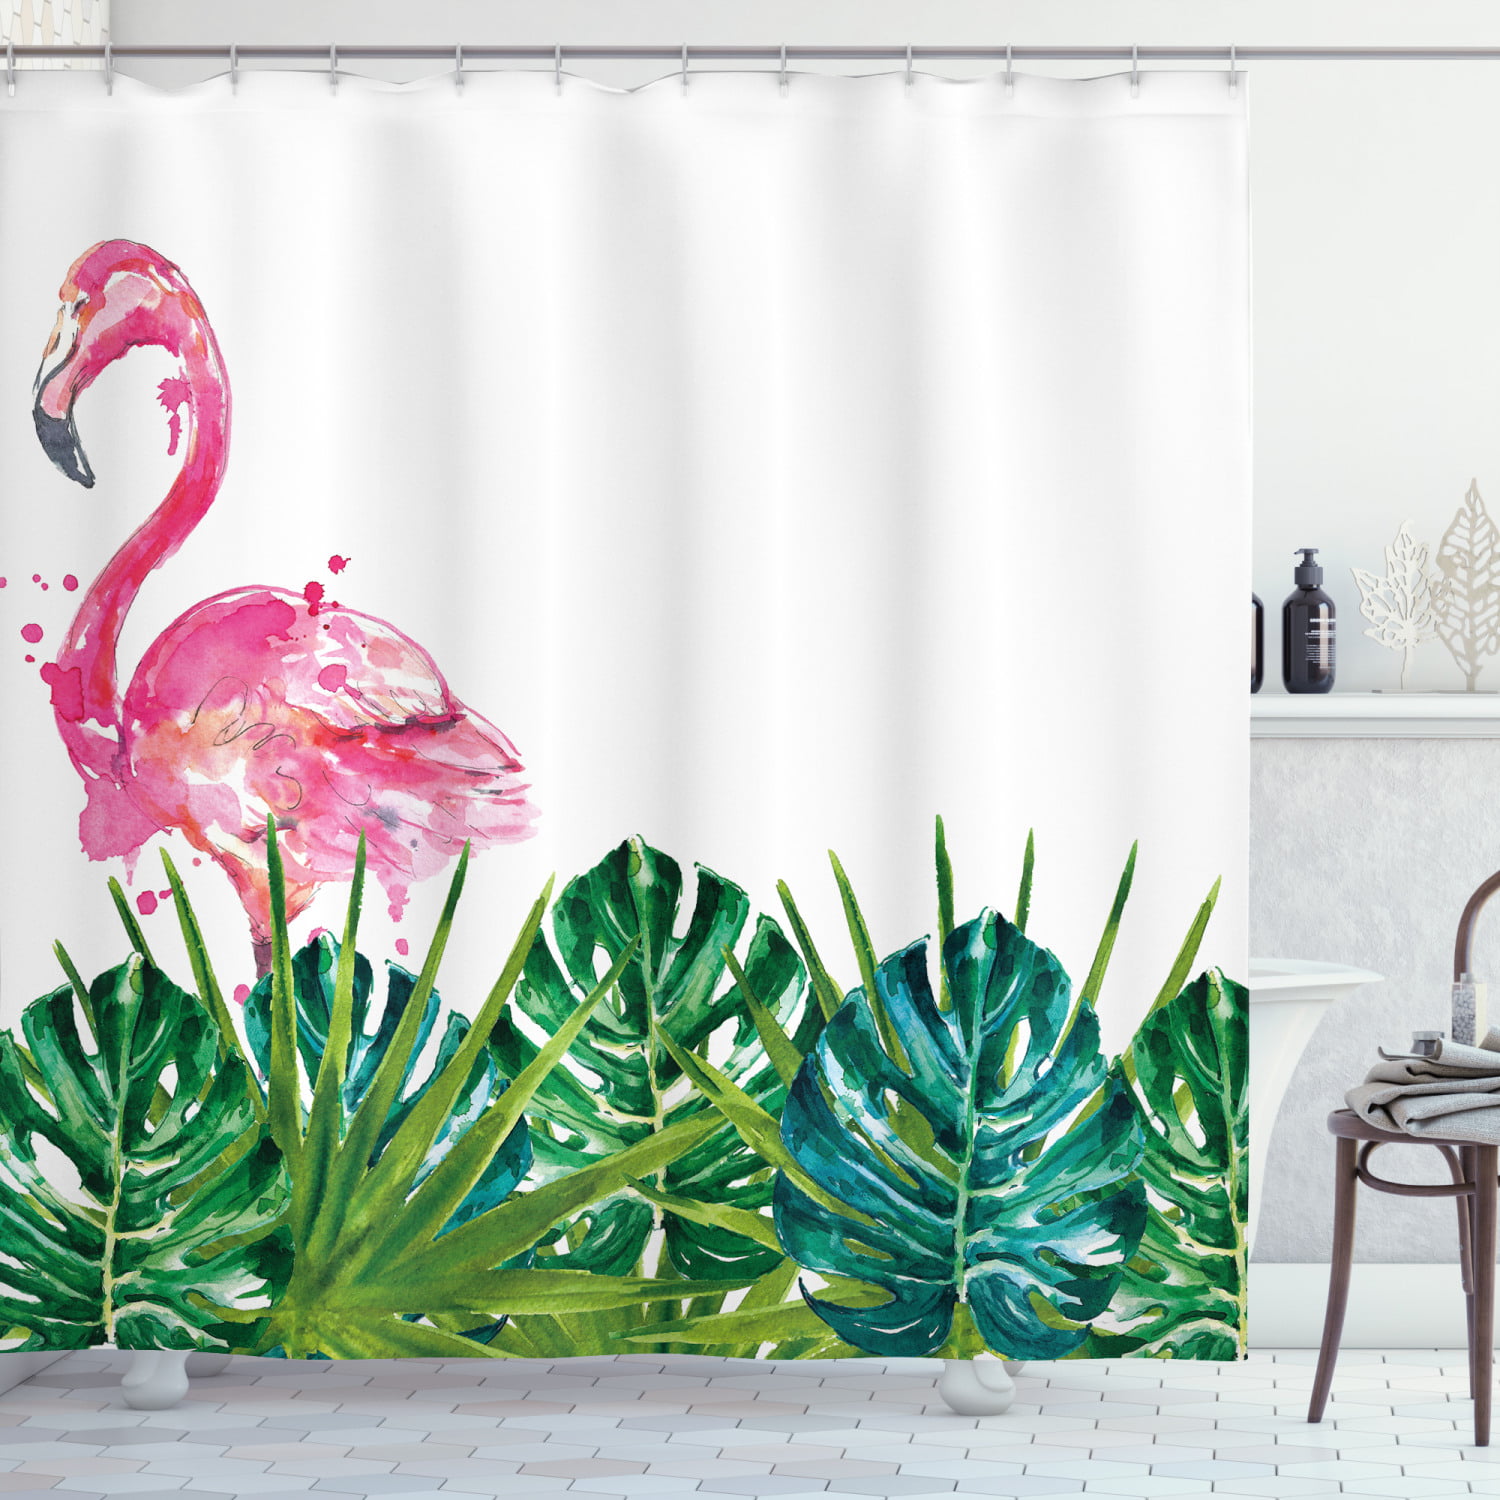 Green Tropical Palm Pink Flamingo Shower Curtain Waterproof Bath Shower Curtains Bathroom Curtains Set with 12 Hooks Personalized curtain